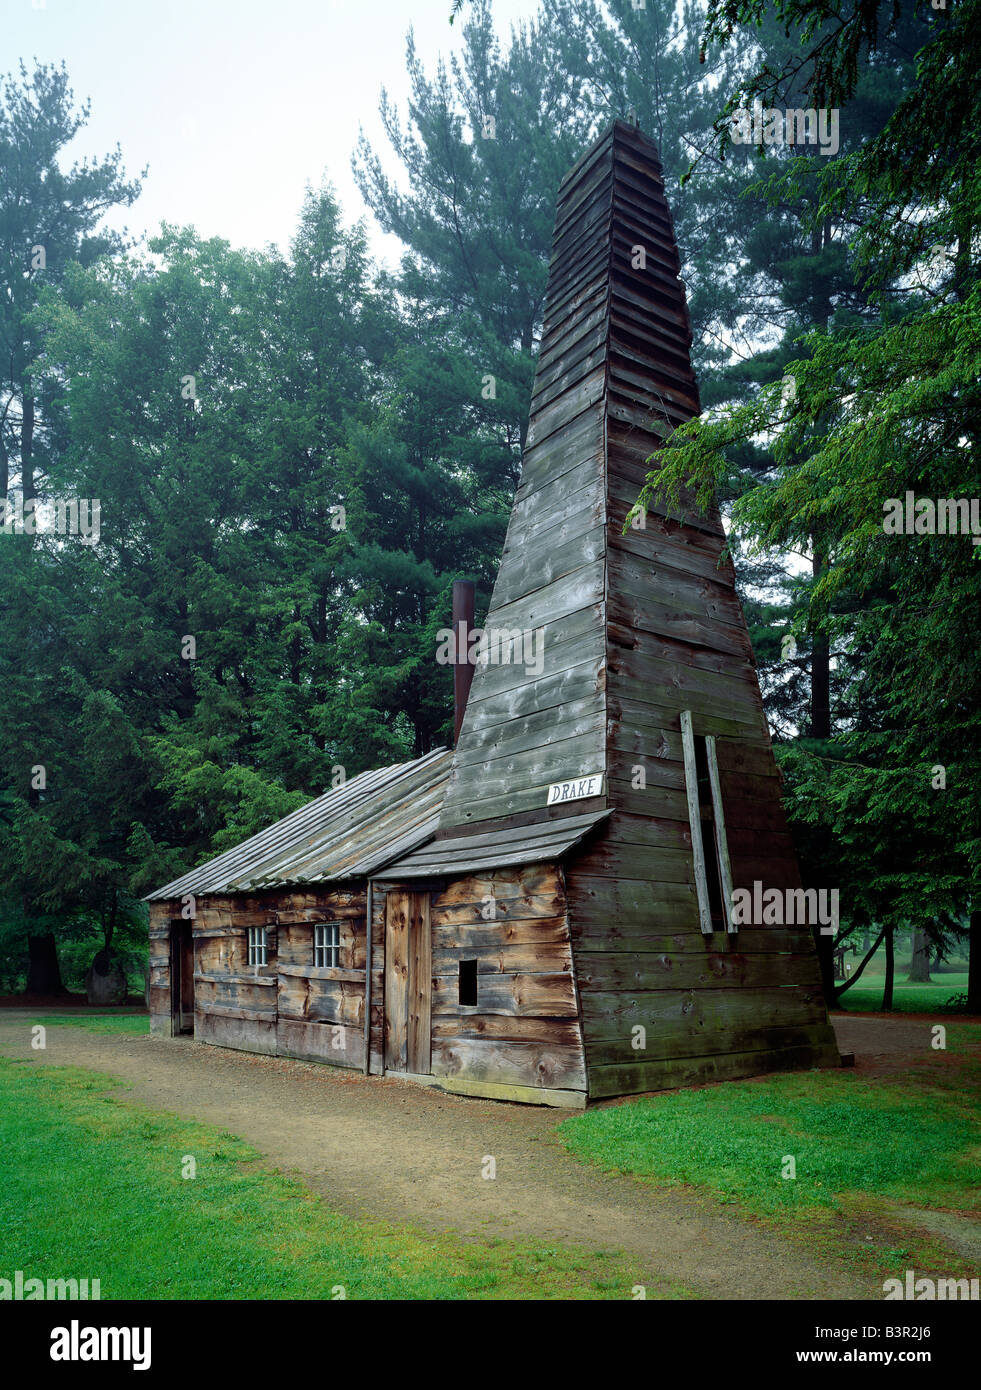 REPLICA OF FIRST OIL WELL IN WORLD, 1859, DRAKE WELL MUSEUM, TITUSVILLE, PENNSYLVANIA, USA Stock Photo